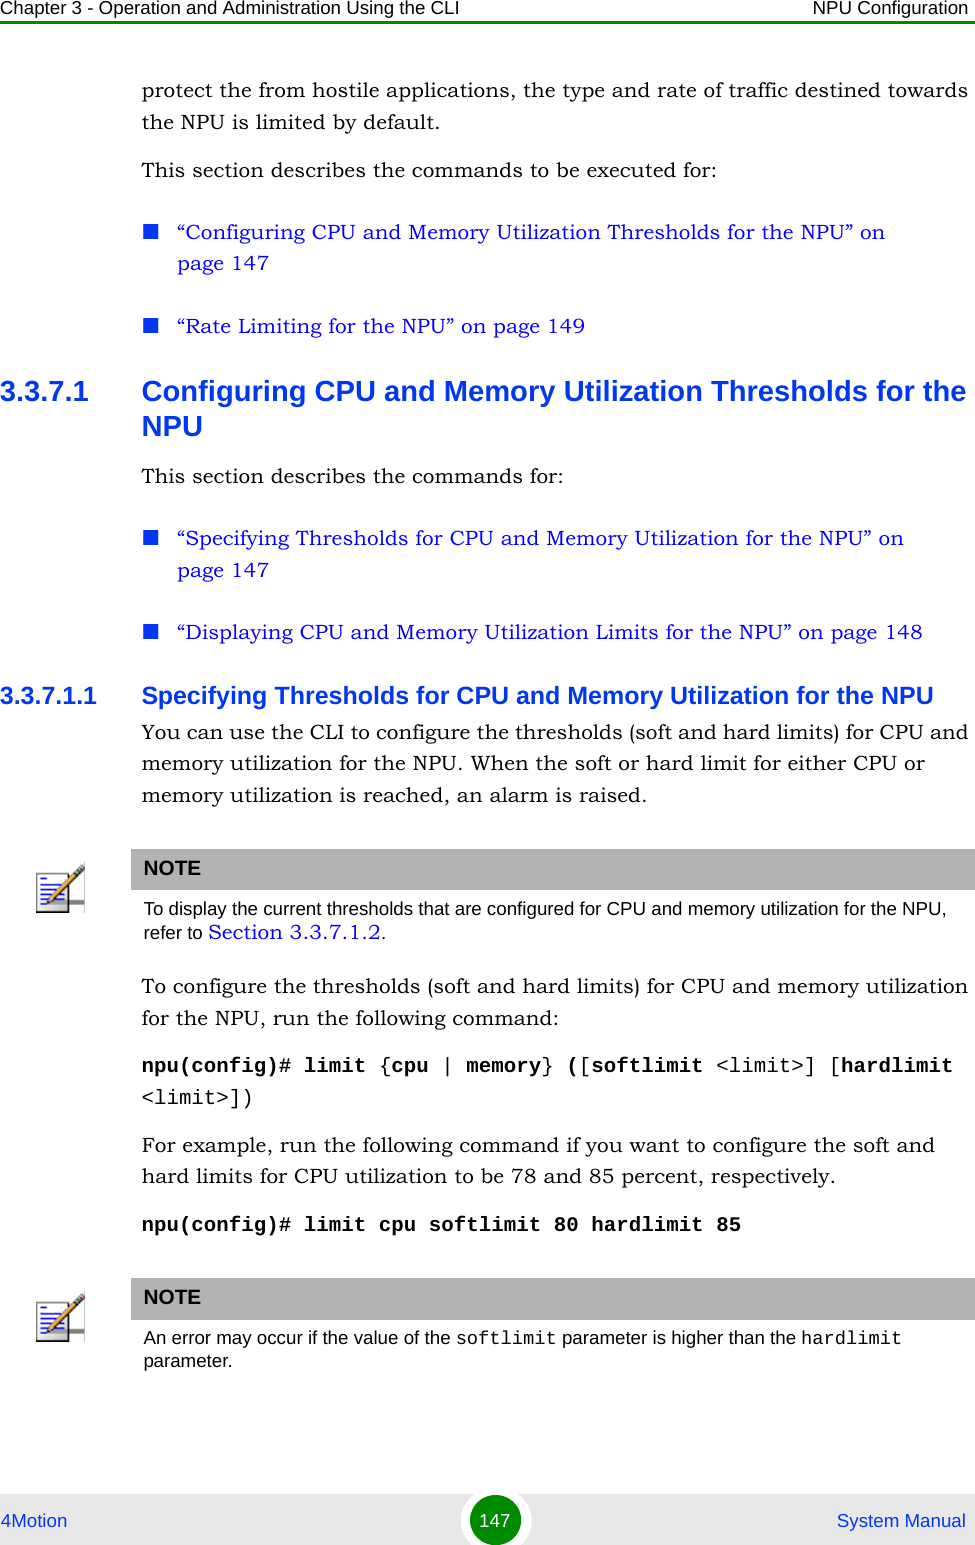 Chapter 3 - Operation and Administration Using the CLI NPU Configuration4Motion 147  System Manualprotect the from hostile applications, the type and rate of traffic destined towards the NPU is limited by default. This section describes the commands to be executed for:“Configuring CPU and Memory Utilization Thresholds for the NPU” on page 147“Rate Limiting for the NPU” on page 1493.3.7.1 Configuring CPU and Memory Utilization Thresholds for the NPUThis section describes the commands for:“Specifying Thresholds for CPU and Memory Utilization for the NPU” on page 147“Displaying CPU and Memory Utilization Limits for the NPU” on page 1483.3.7.1.1 Specifying Thresholds for CPU and Memory Utilization for the NPUYou can use the CLI to configure the thresholds (soft and hard limits) for CPU and memory utilization for the NPU. When the soft or hard limit for either CPU or memory utilization is reached, an alarm is raised.To configure the thresholds (soft and hard limits) for CPU and memory utilization for the NPU, run the following command:npu(config)# limit {cpu | memory} ([softlimit &lt;limit&gt;] [hardlimit &lt;limit&gt;])For example, run the following command if you want to configure the soft and hard limits for CPU utilization to be 78 and 85 percent, respectively.npu(config)# limit cpu softlimit 80 hardlimit 85NOTETo display the current thresholds that are configured for CPU and memory utilization for the NPU, refer to Section 3.3.7.1.2.NOTEAn error may occur if the value of the softlimit parameter is higher than the hardlimit parameter. 